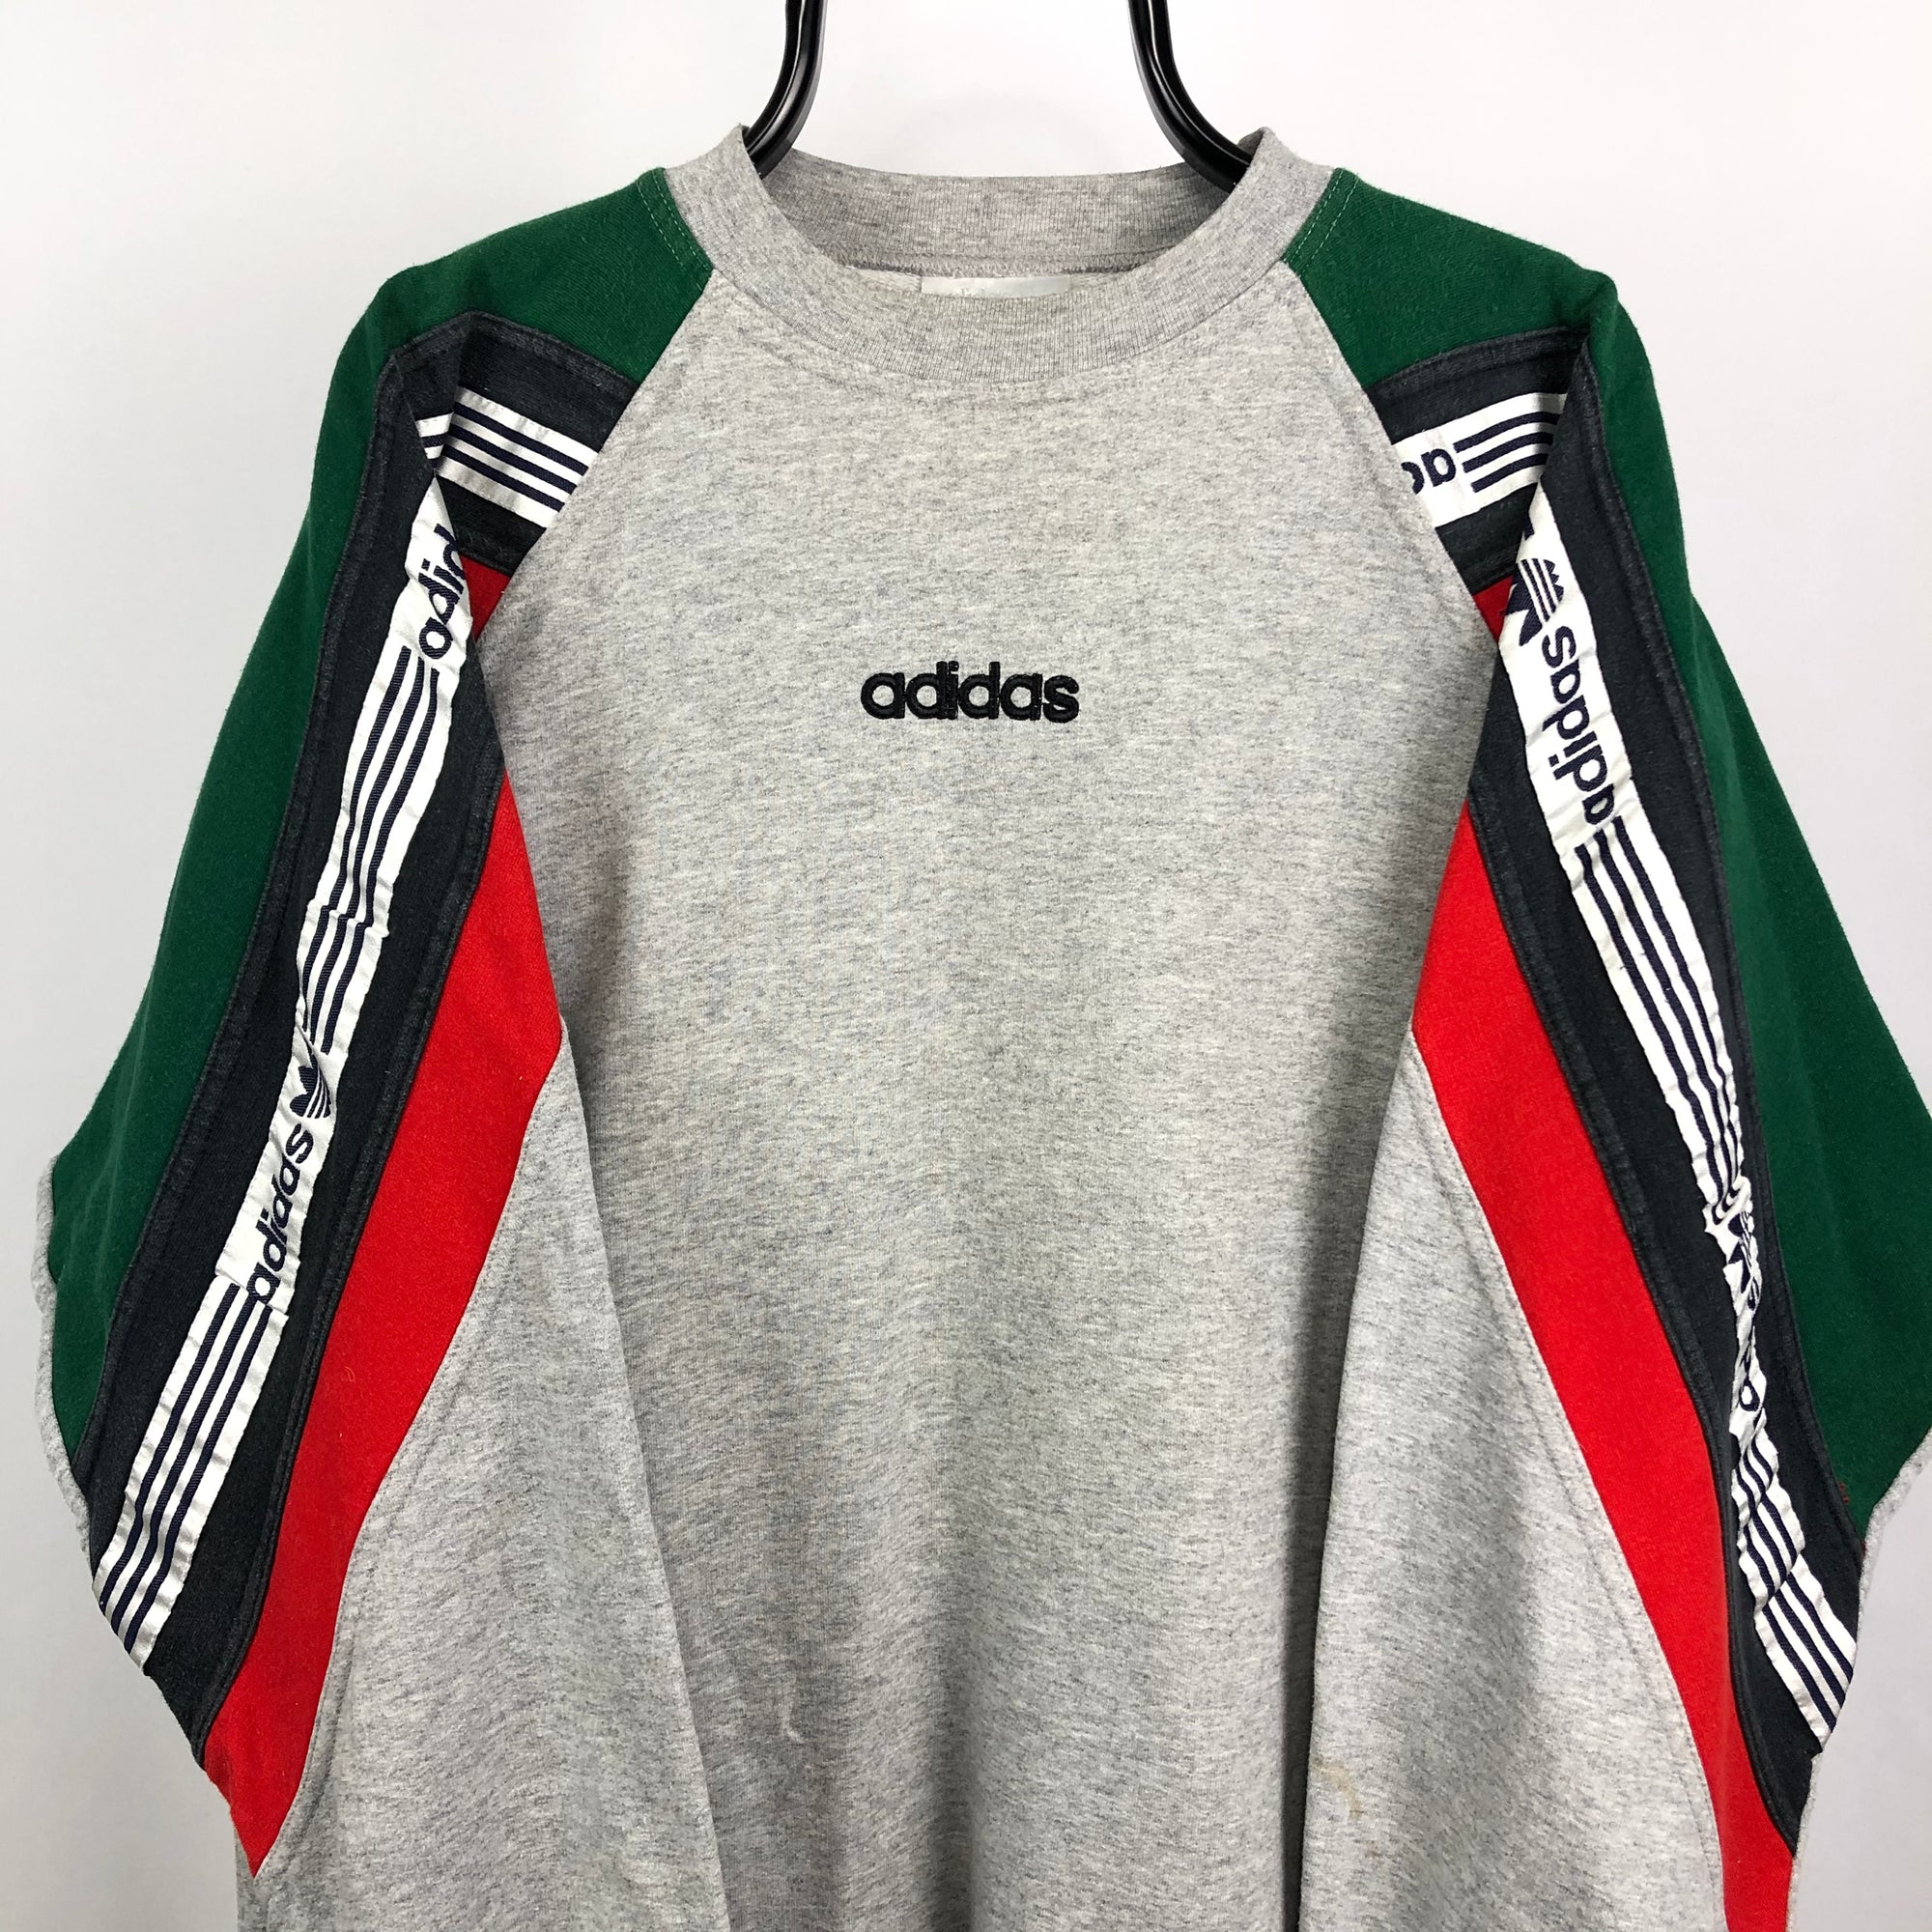 Vintage 80s Adidas Embroidered Centre Spellout in Grey/Red/Green - Men's Large/Women's XL